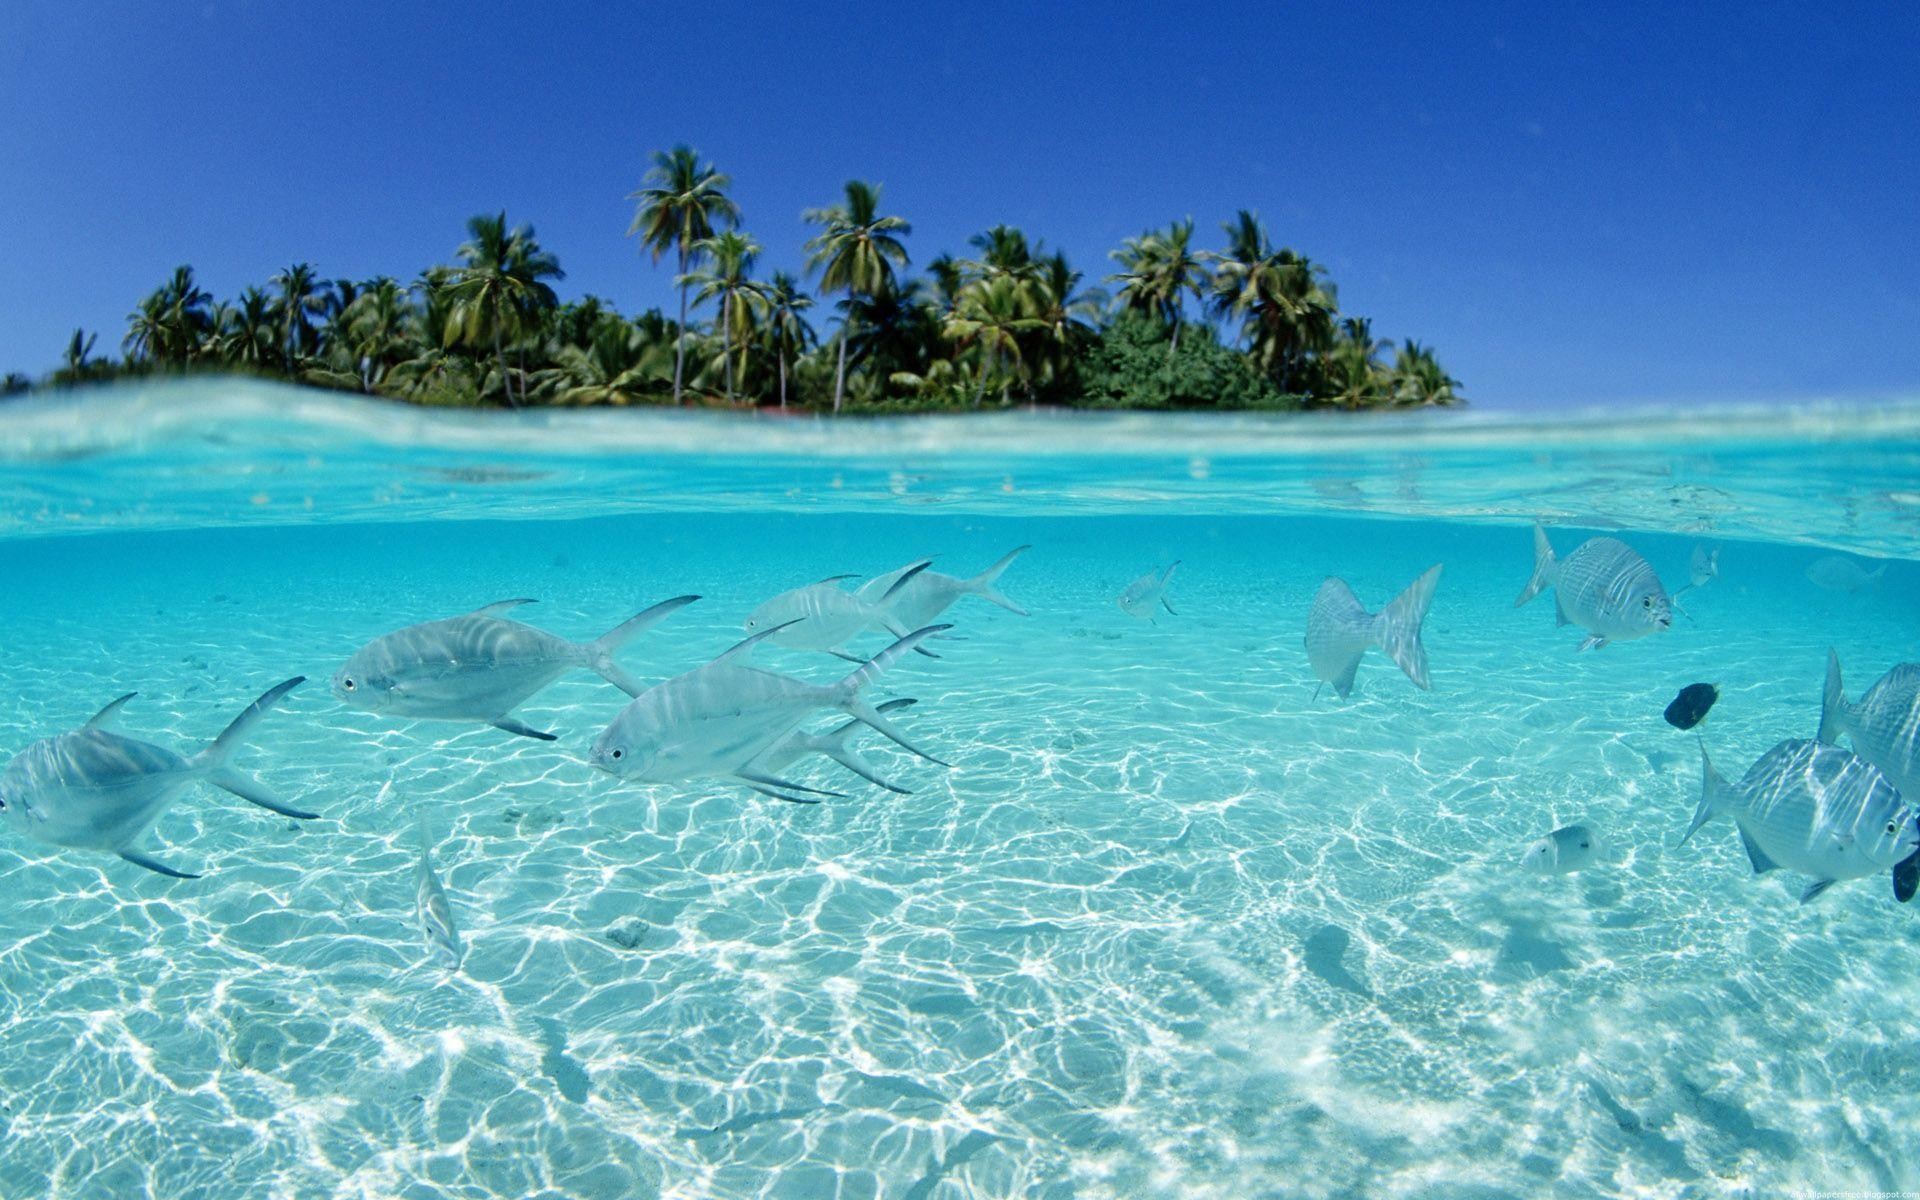 Tropical Island Wallpaper With Fish Image